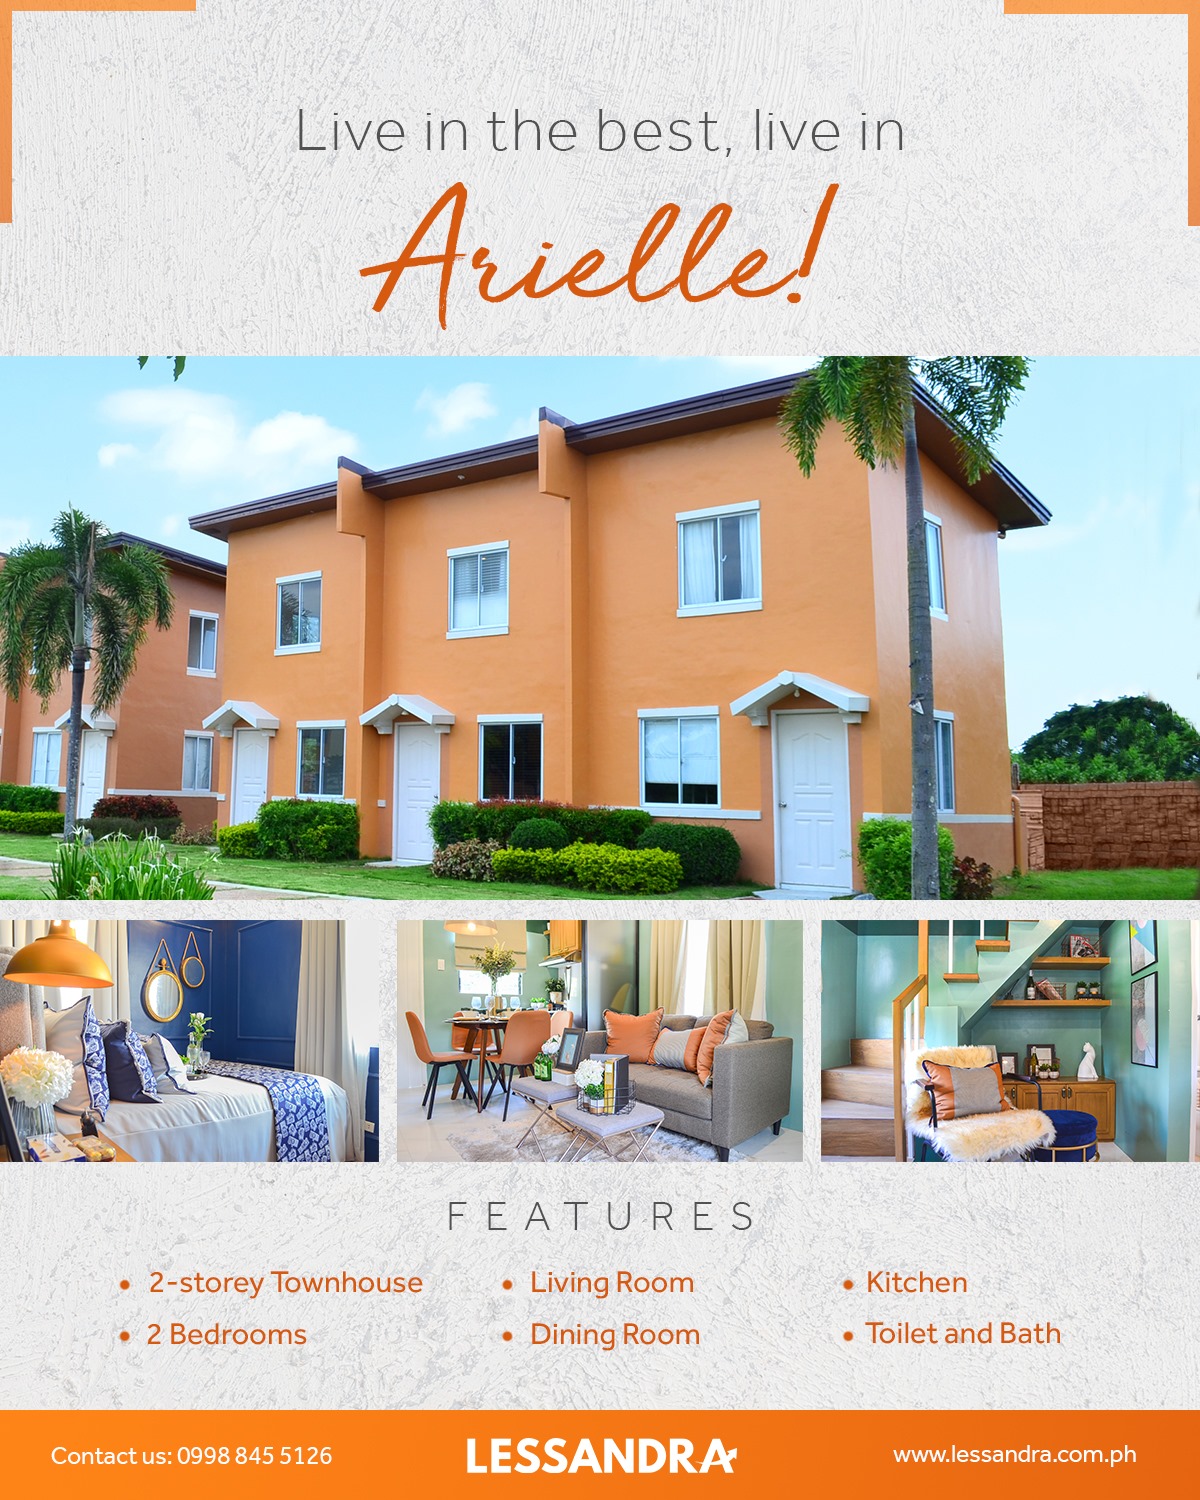 Arielle Inner Unit Pag-ibig Financing